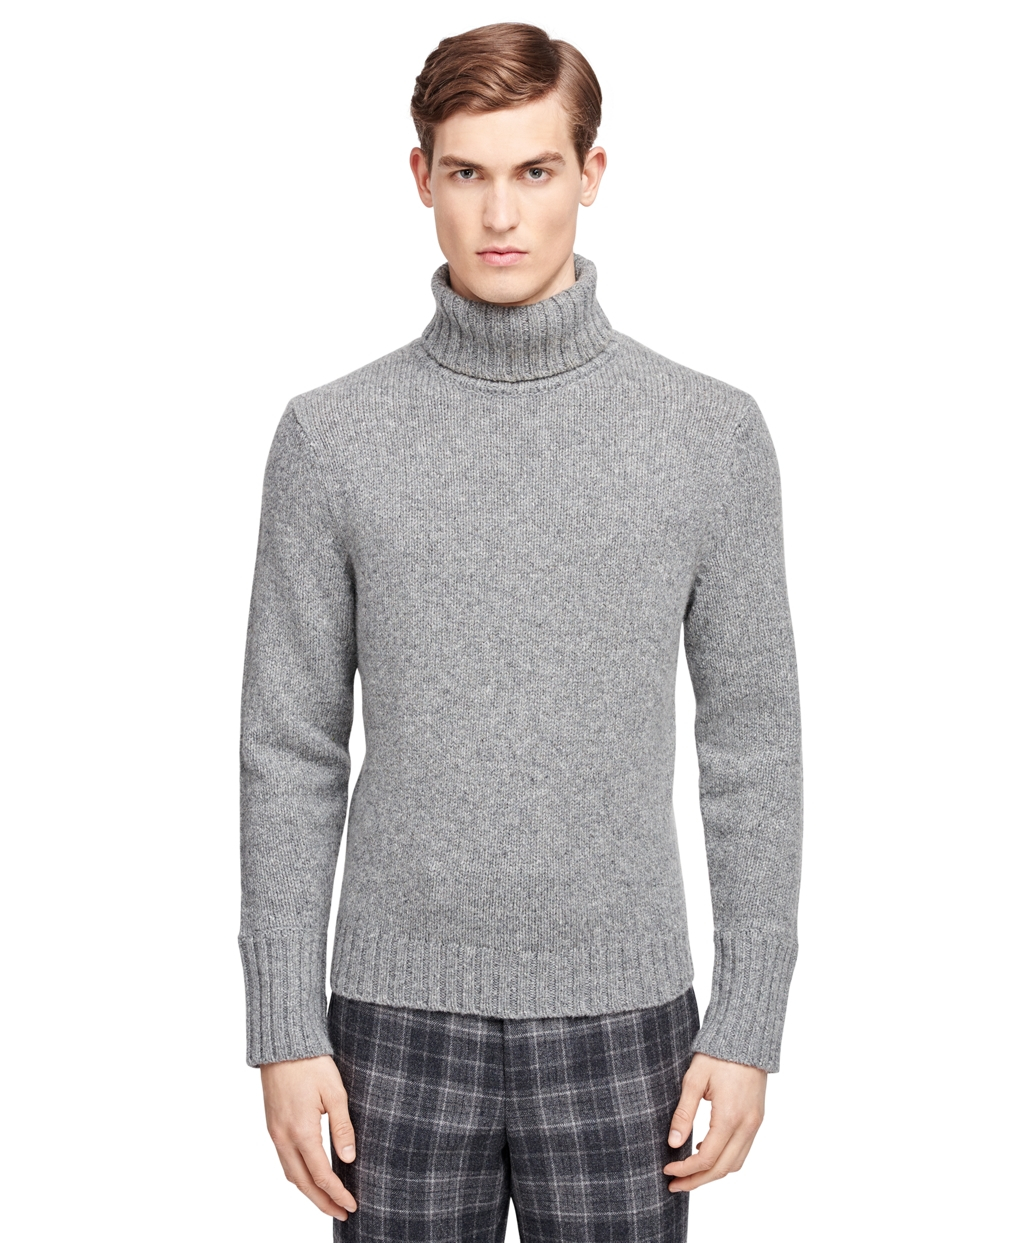 Lyst - Brooks Brothers Lambswool And Cashmere Turtleneck in Gray for Men